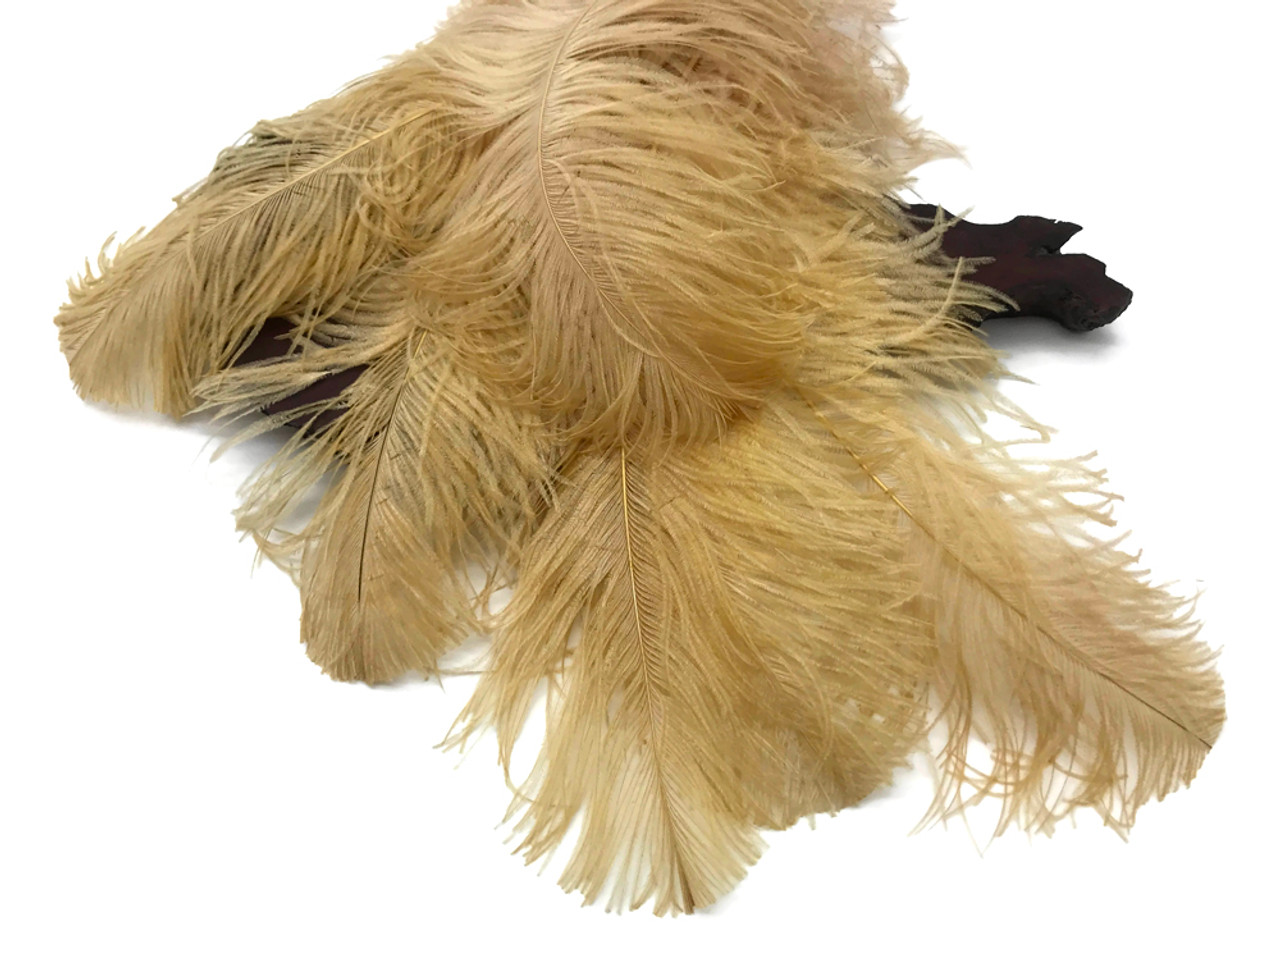 1/2 Lb. - 18-24 Cream Large Ostrich Wing Plume Wholesale Feathers (Bulk)  Wedding Centerpiece Party Supply | Moonlight Feather